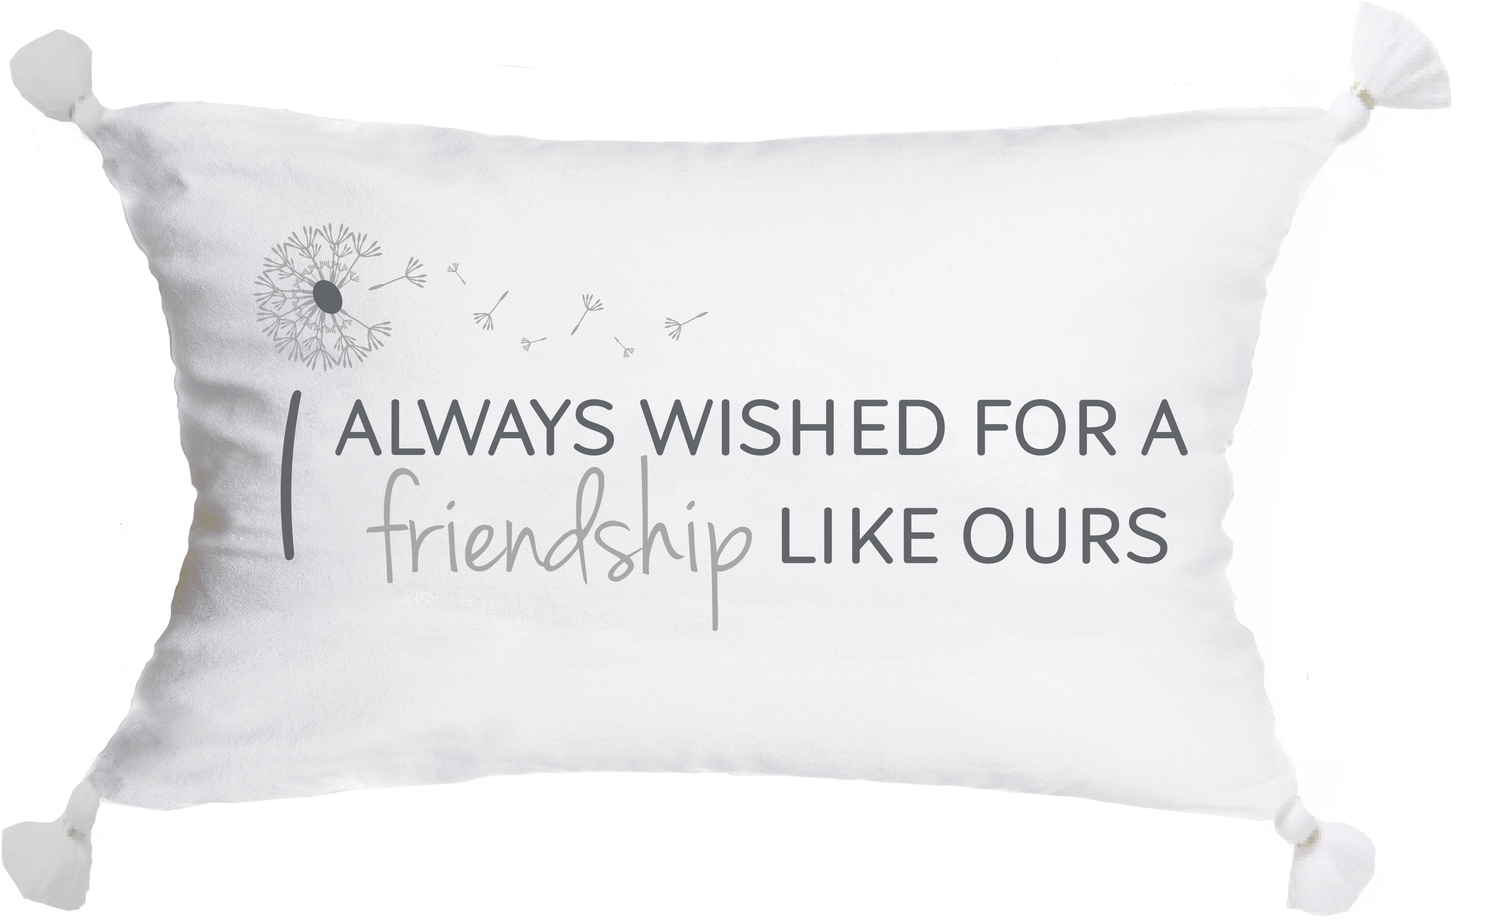 Friendship Like Ours by I Always Wished - Friendship Like Ours - 20" x 12" Throw Pillow